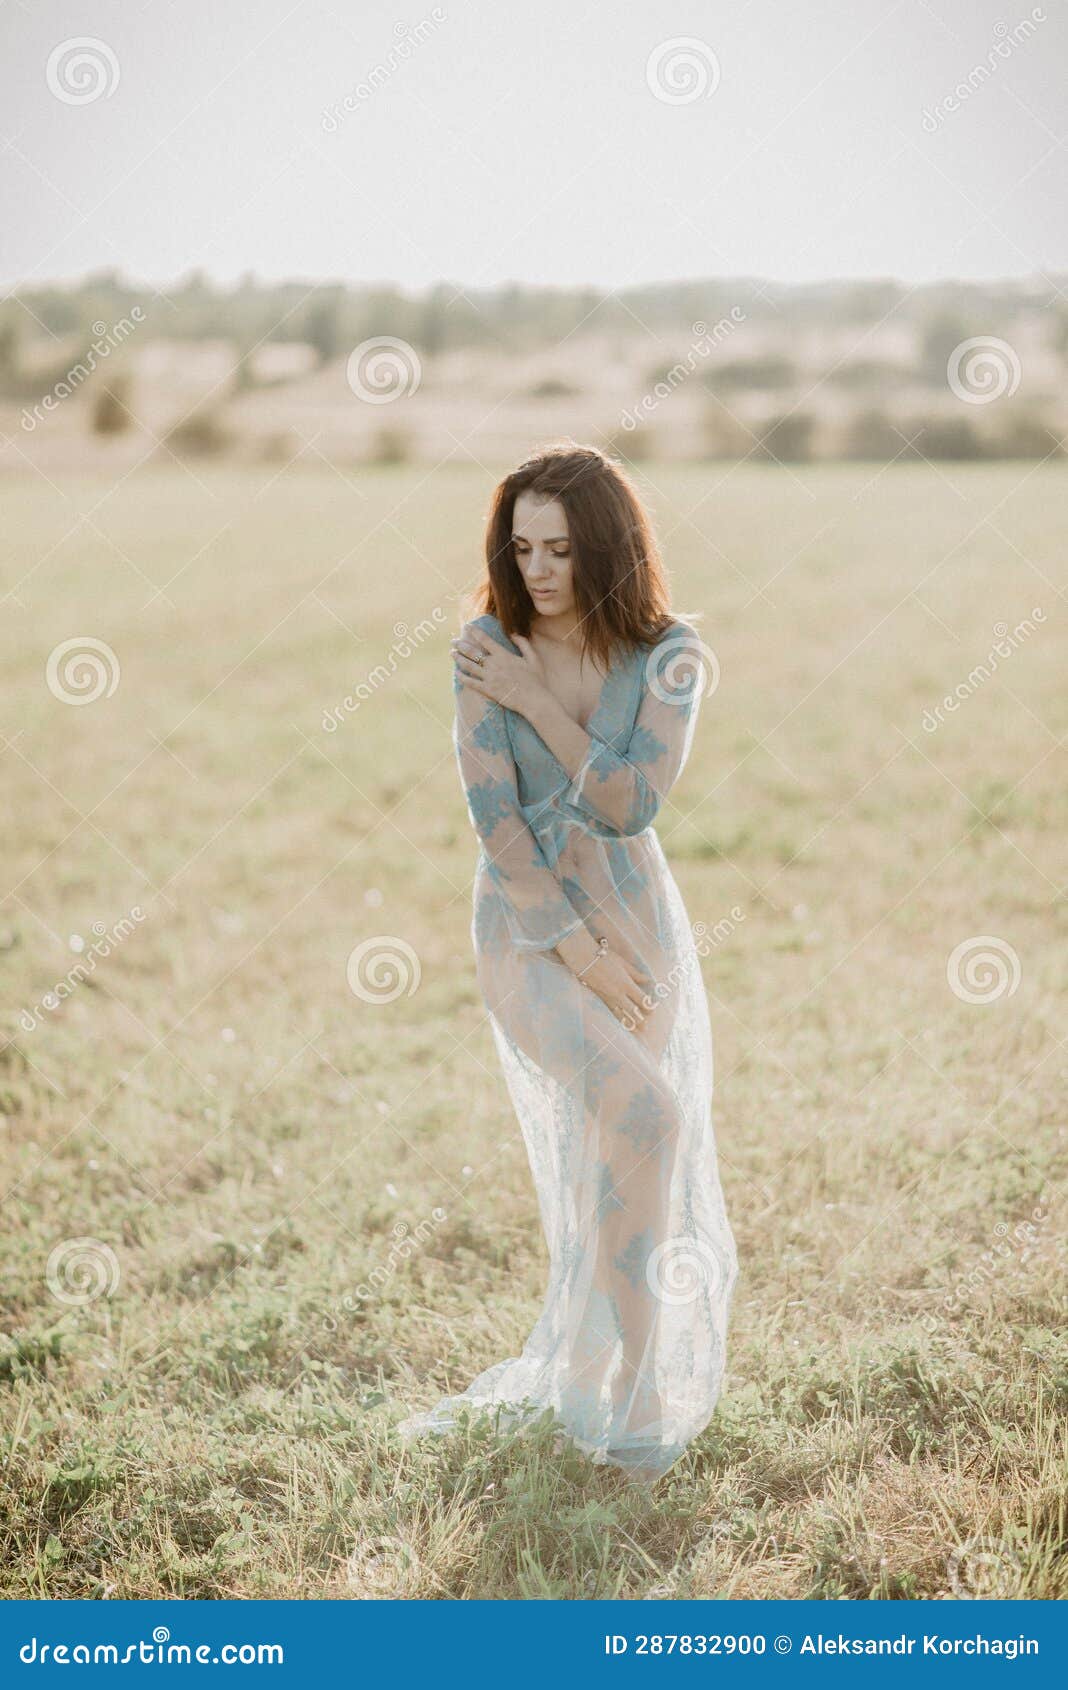 138 Girl Field Topless Stock Photos - Free & Royalty-Free Stock